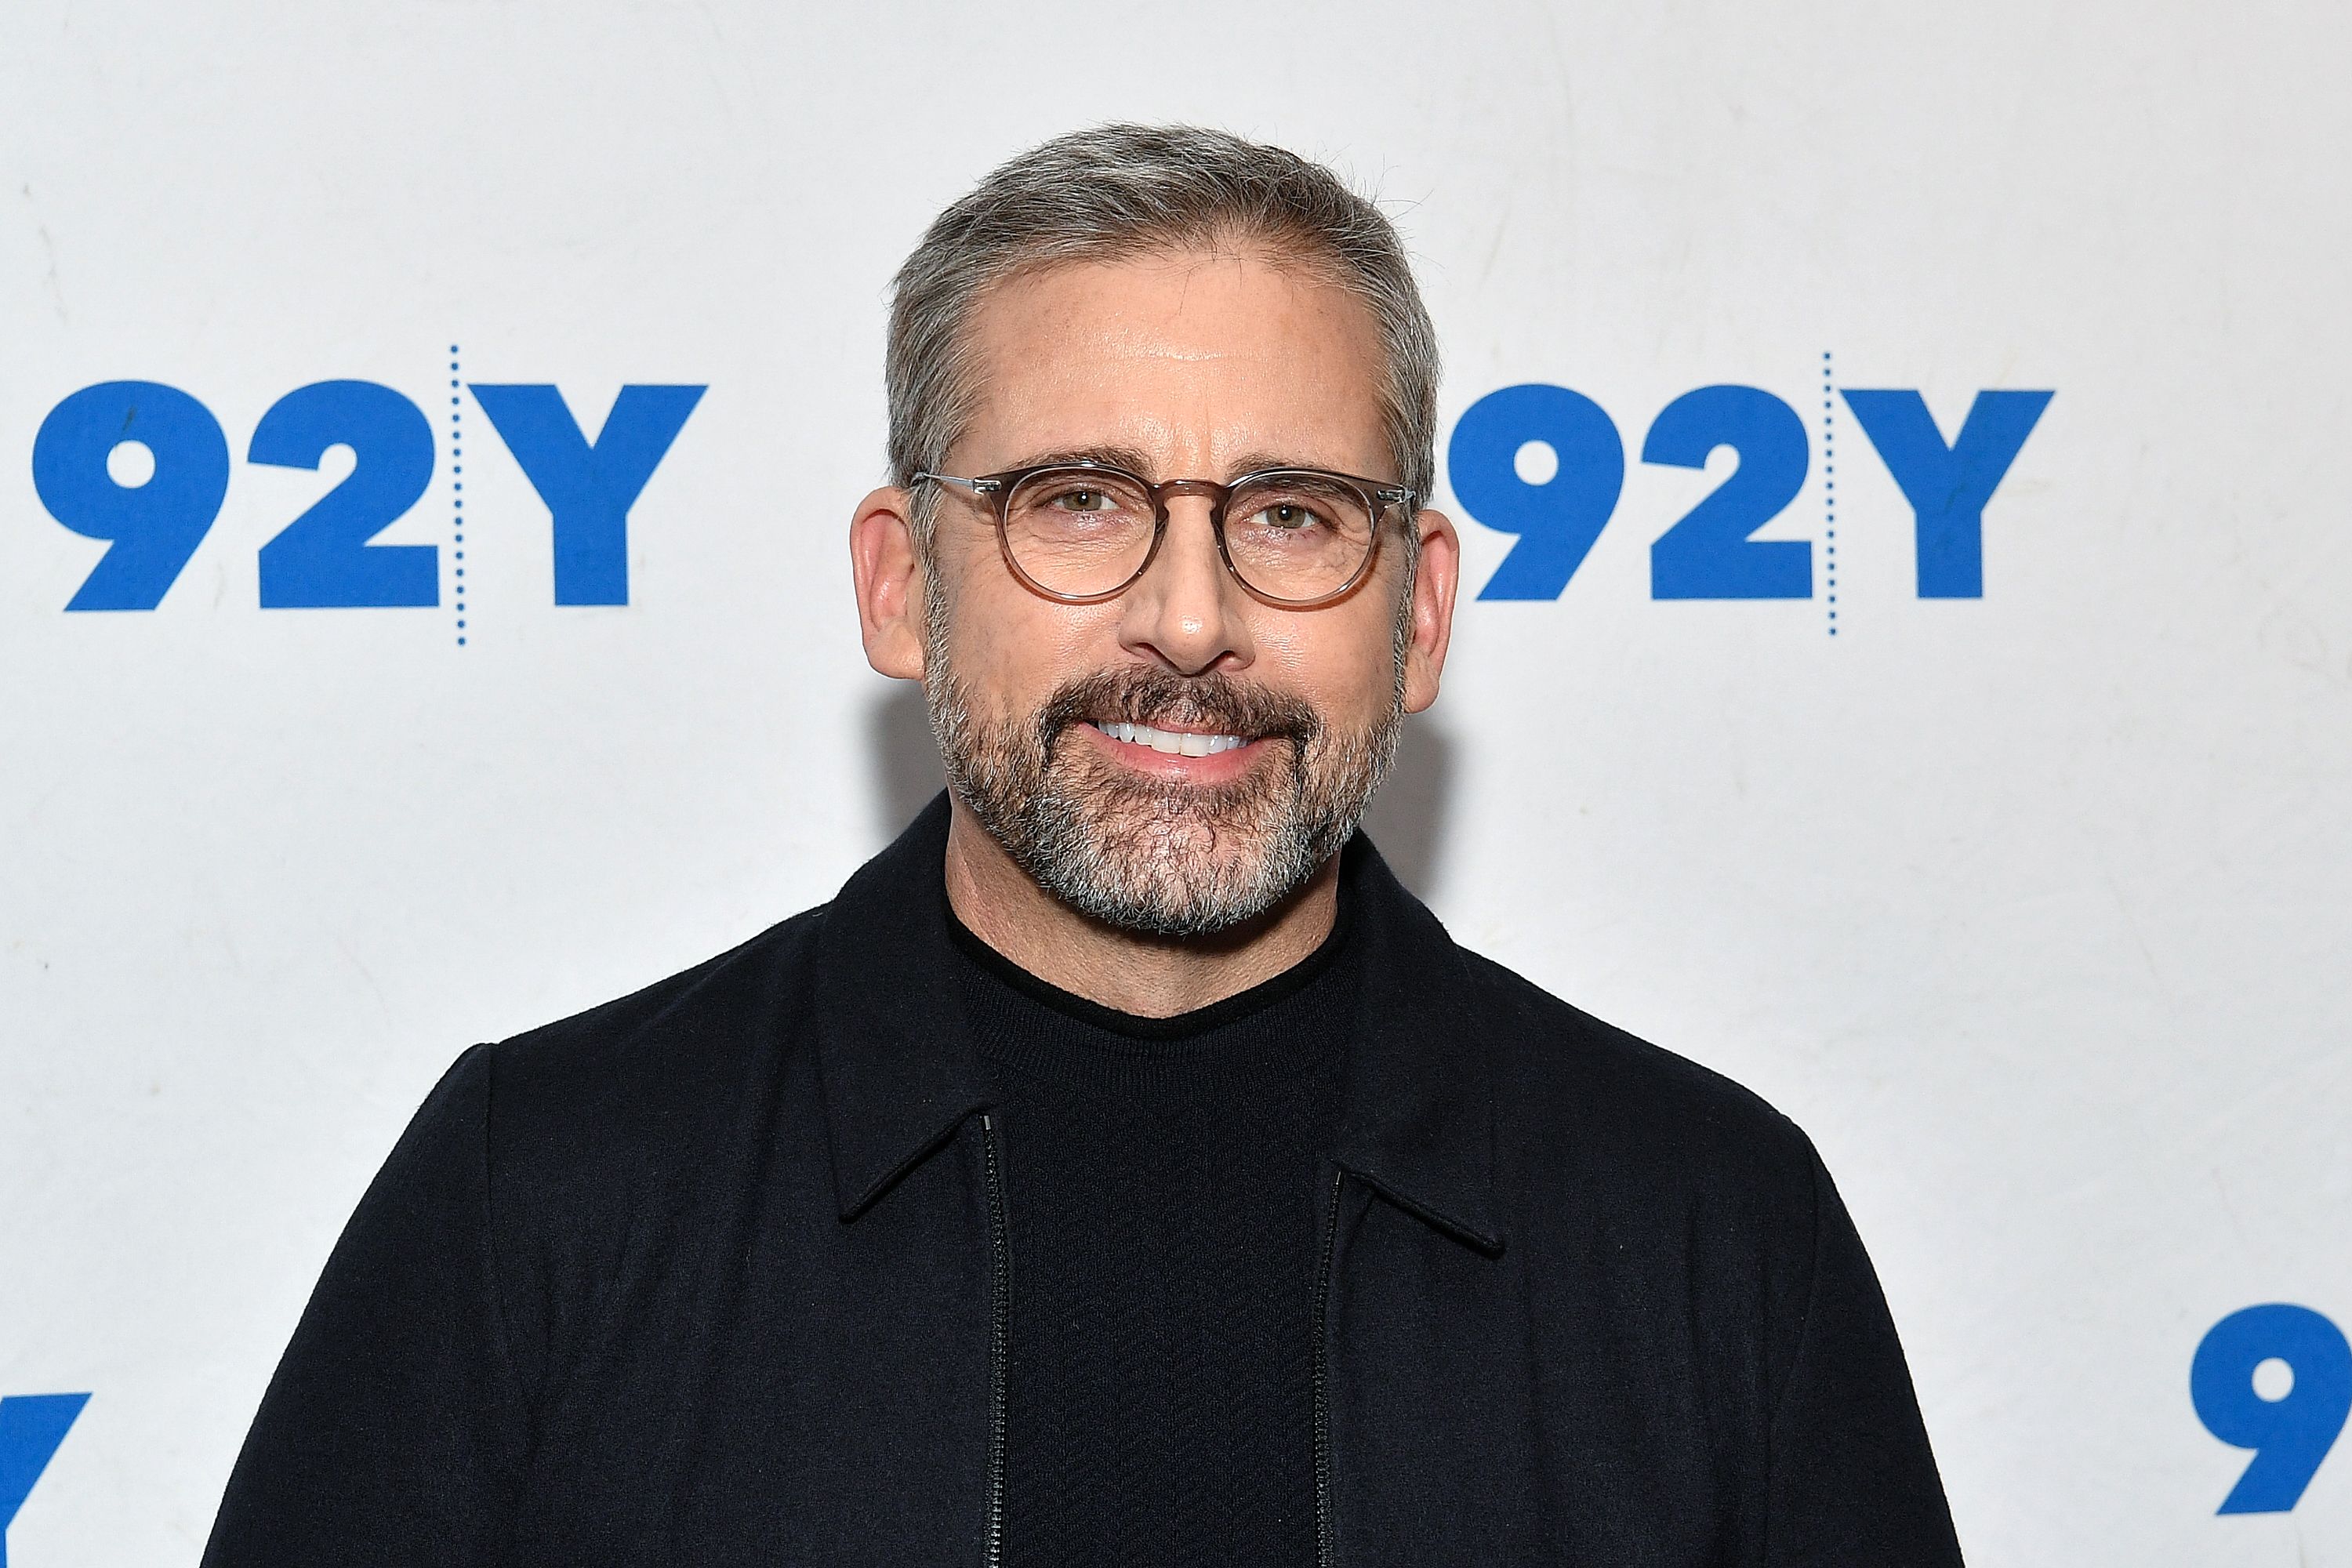 Steve Carell on December 20, 2018, in New York City. | Source: Getty Images